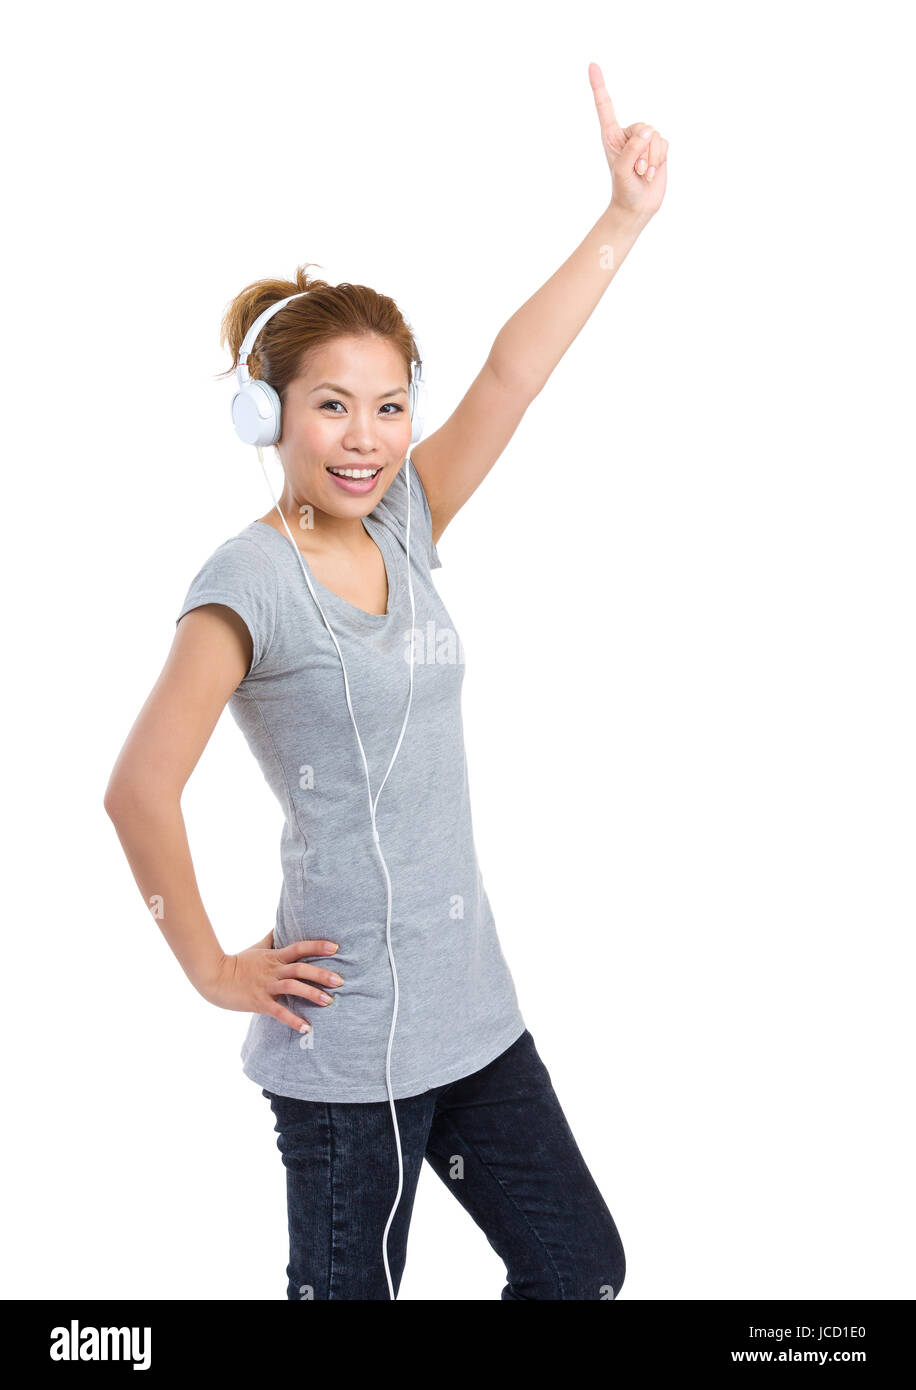 Woman with headphone and finger up Stock Photo